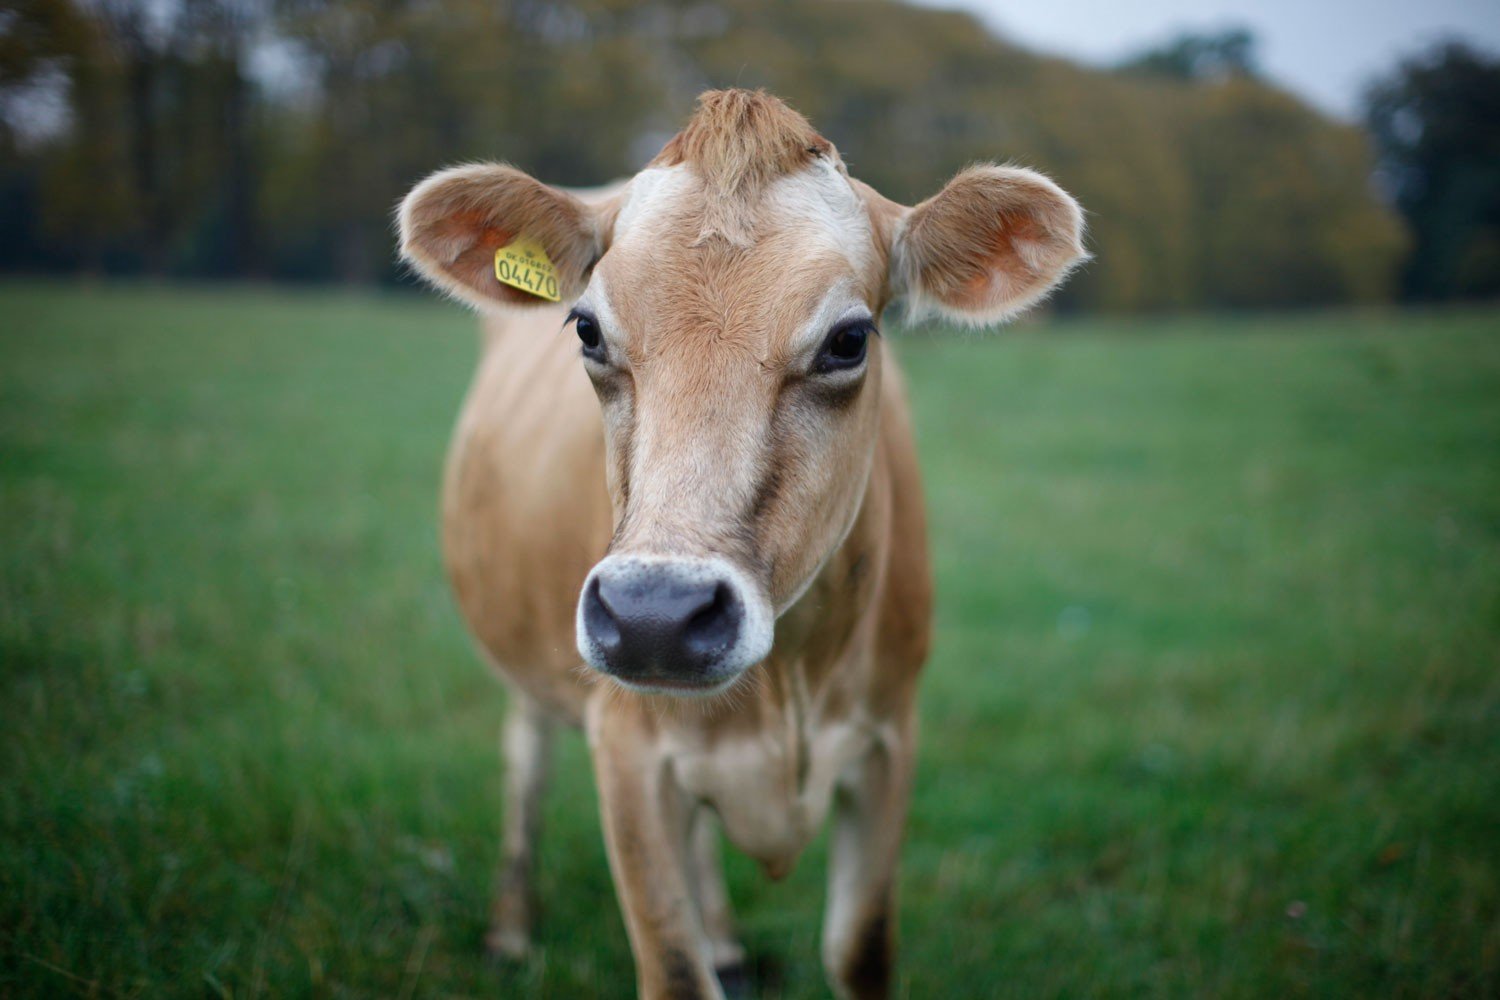 a dairy cow with ear tag